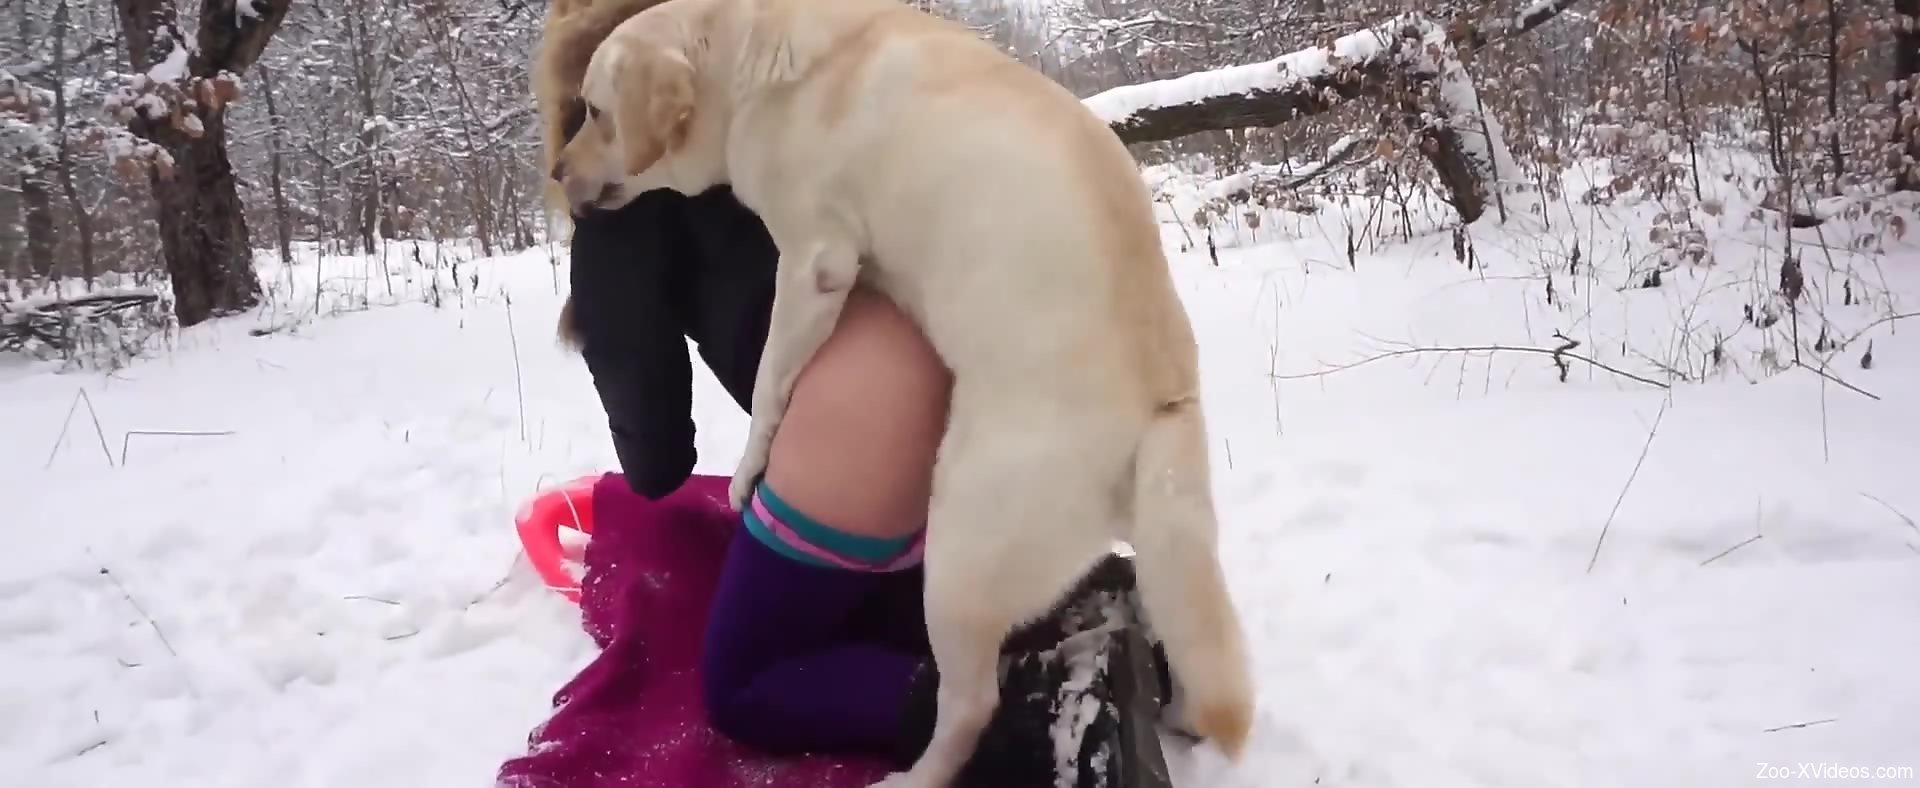 Sexxy Dog - Horny blonde lady fucks a sexy dog in the snow